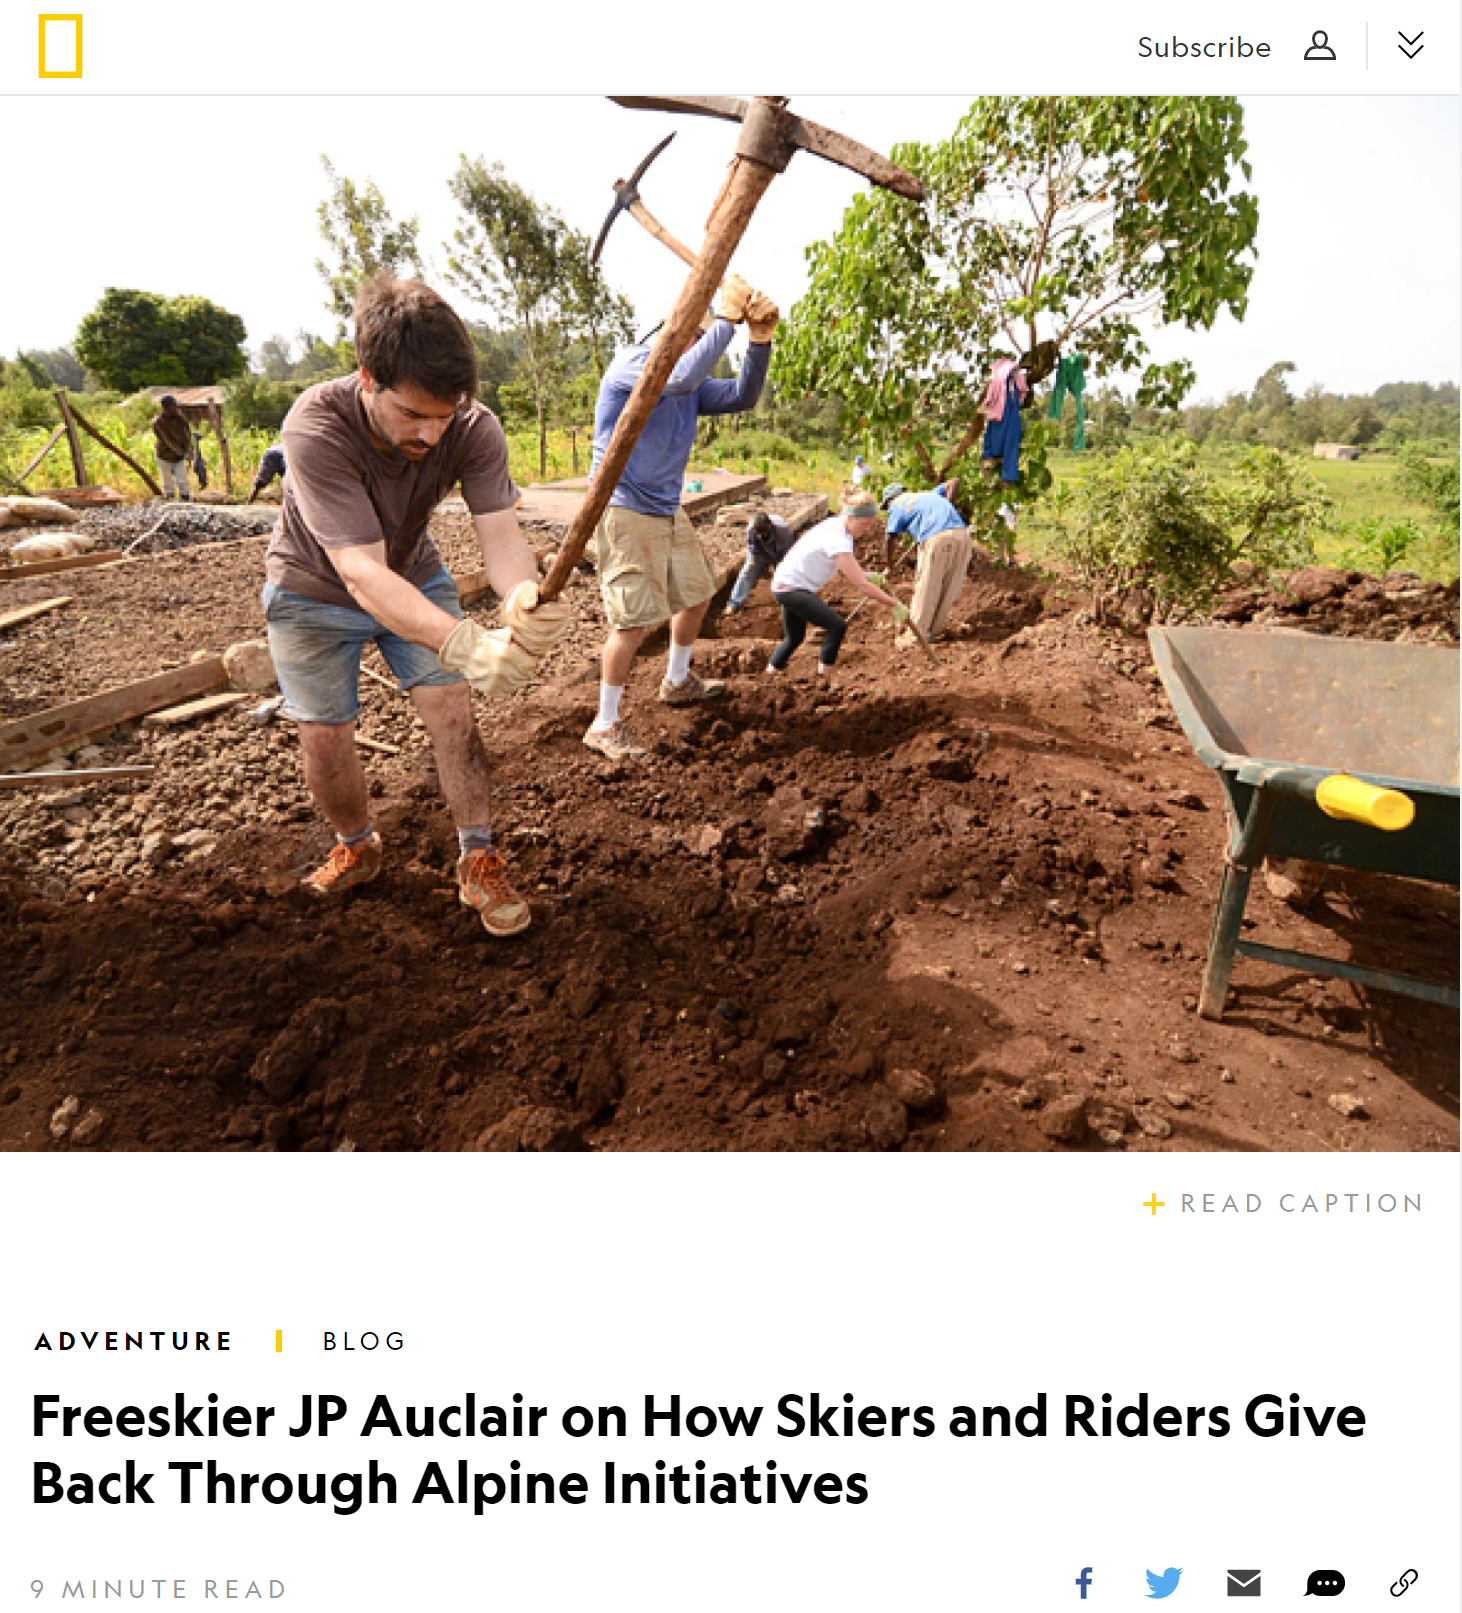 National Geographic Adventure, "Freeskier JP Auclair on How Skiers and Riders Give Back Through Alpine Initiatives"